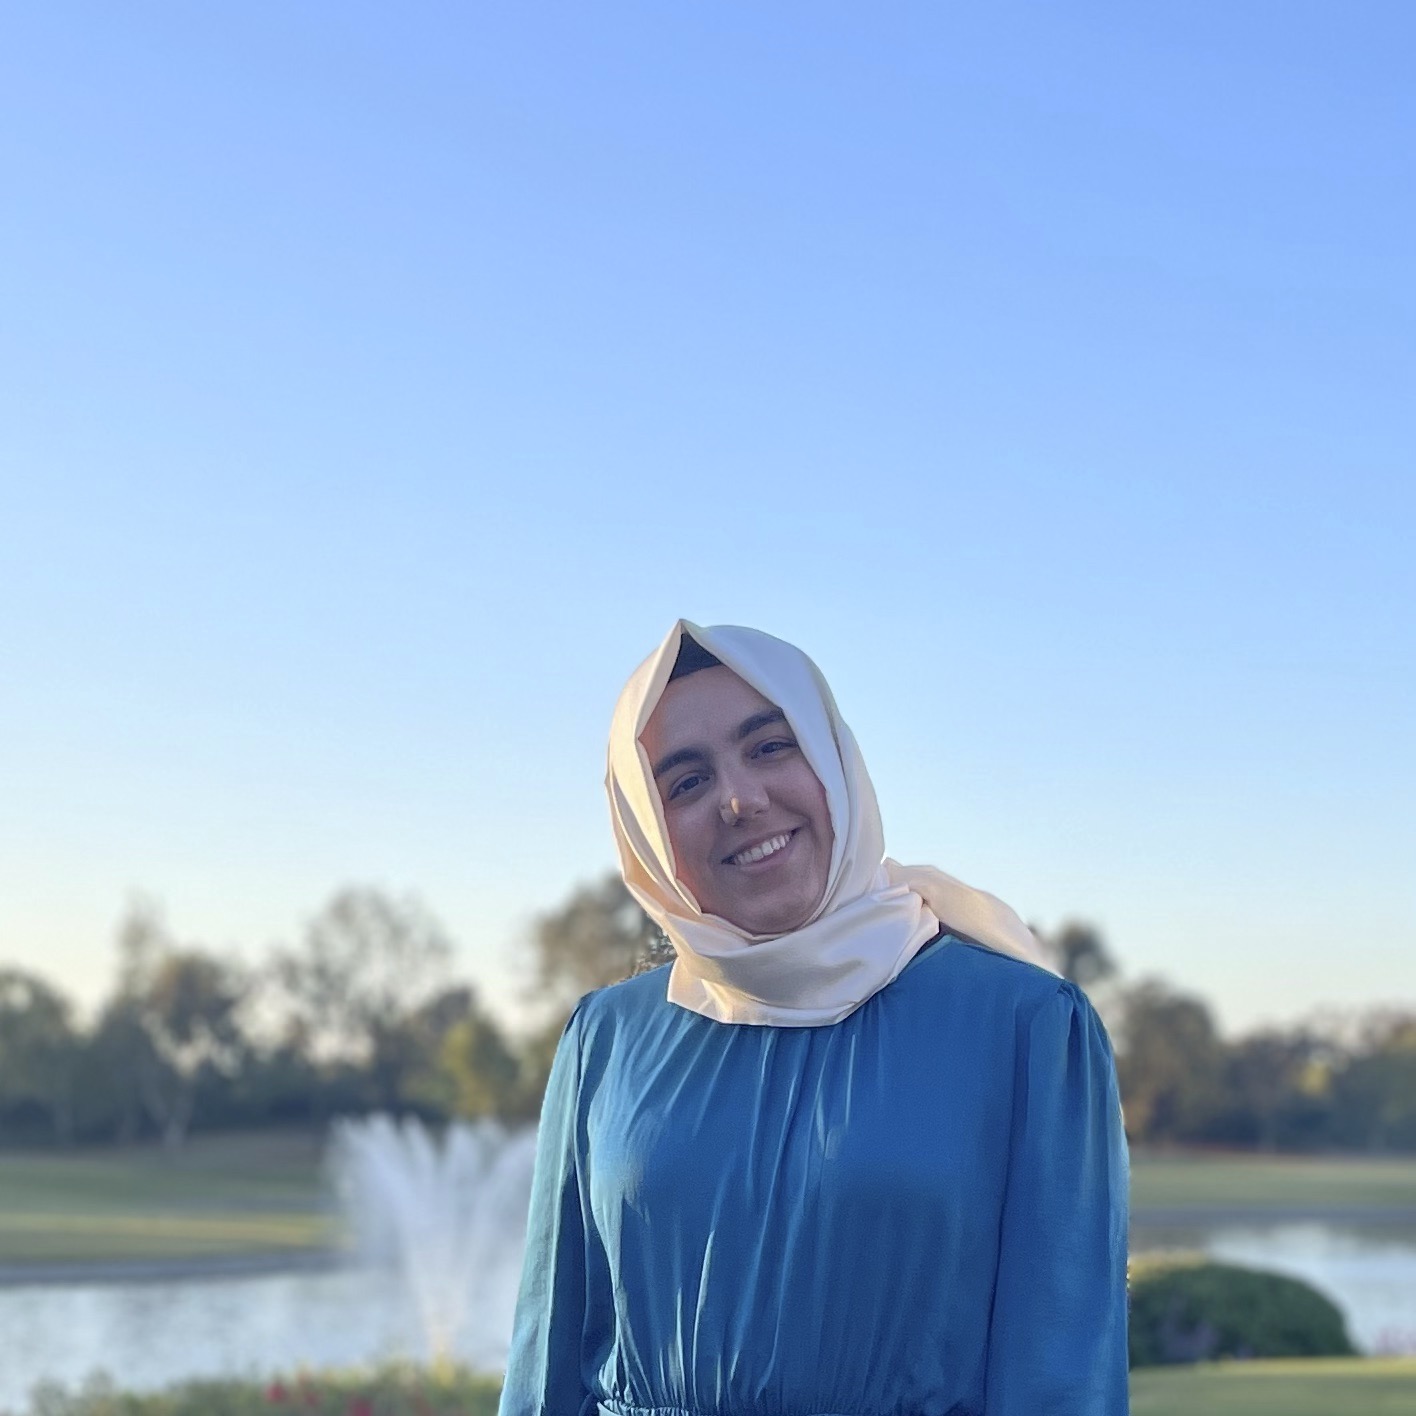 nihan wearing blue shirt with white hijab and fountain background